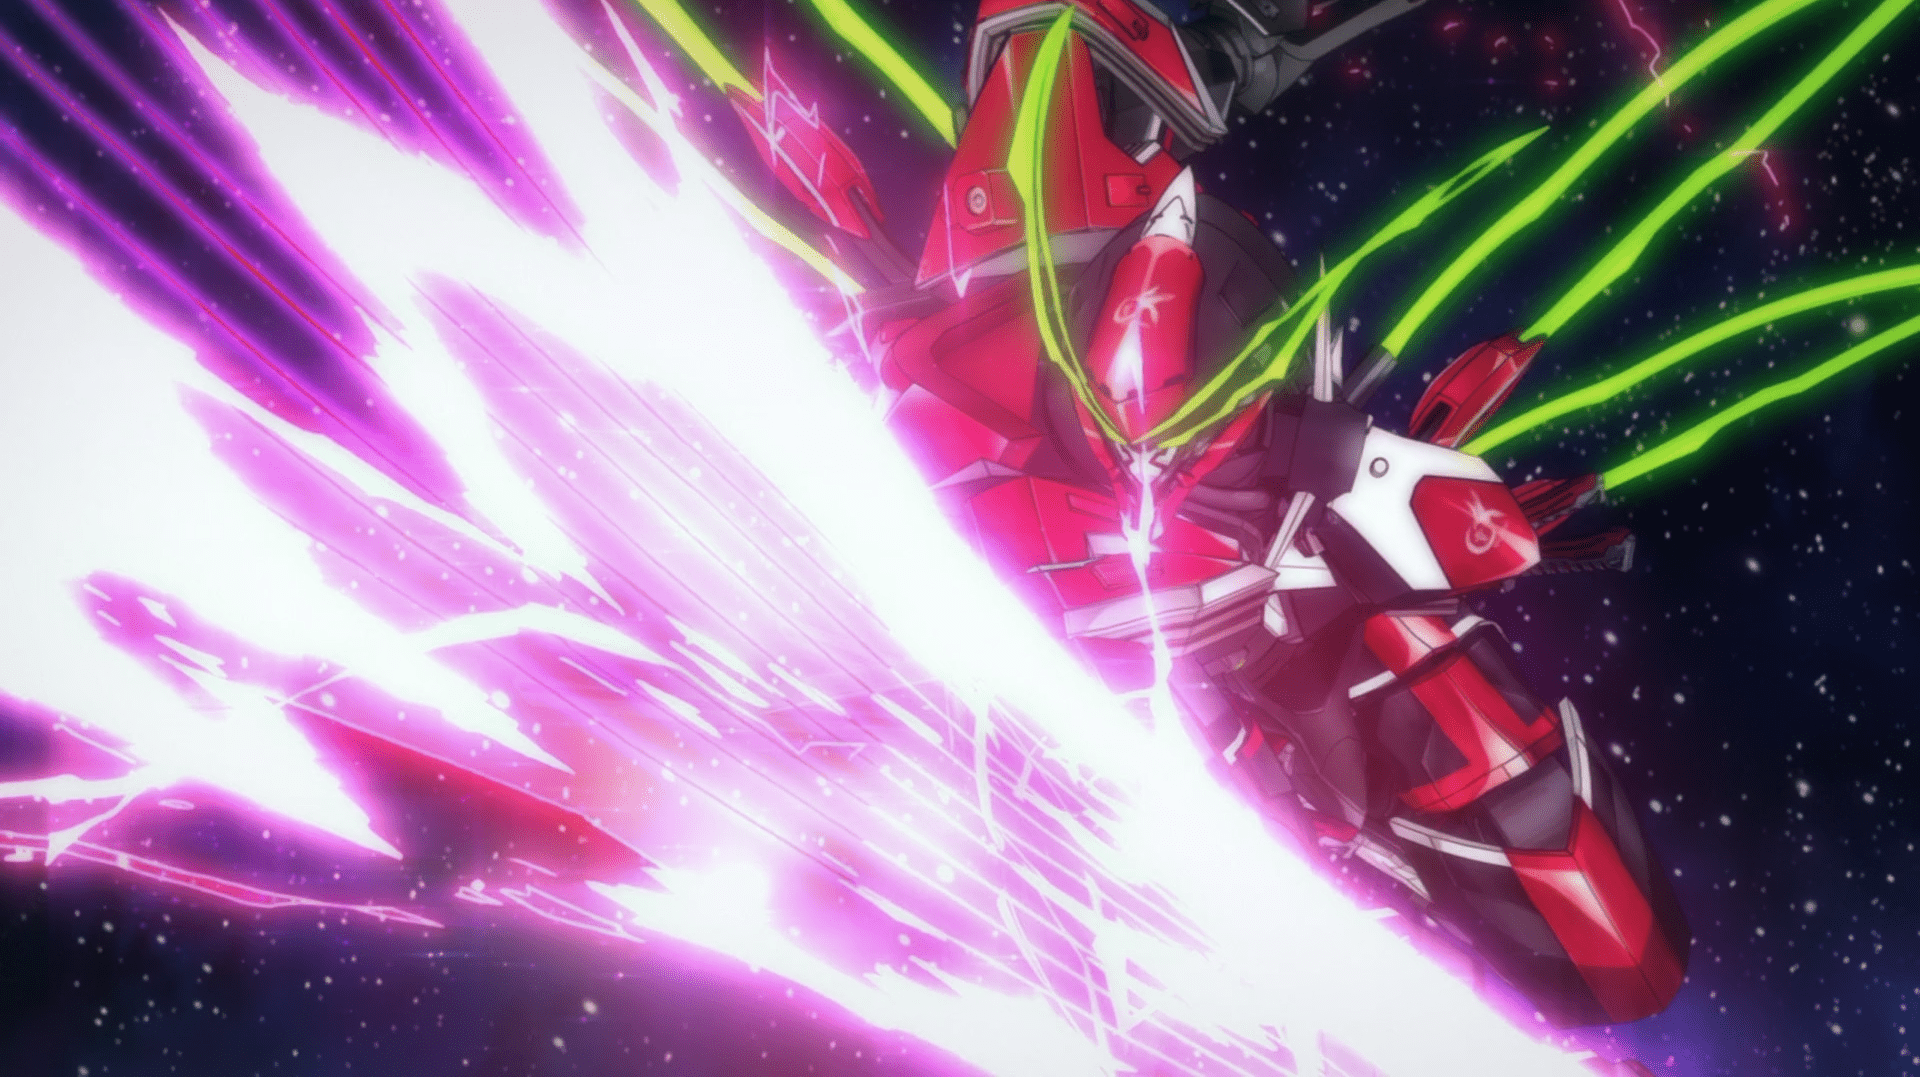 Latest Ending Theme of “Valvrave the Liberator” to Release This June, Music News